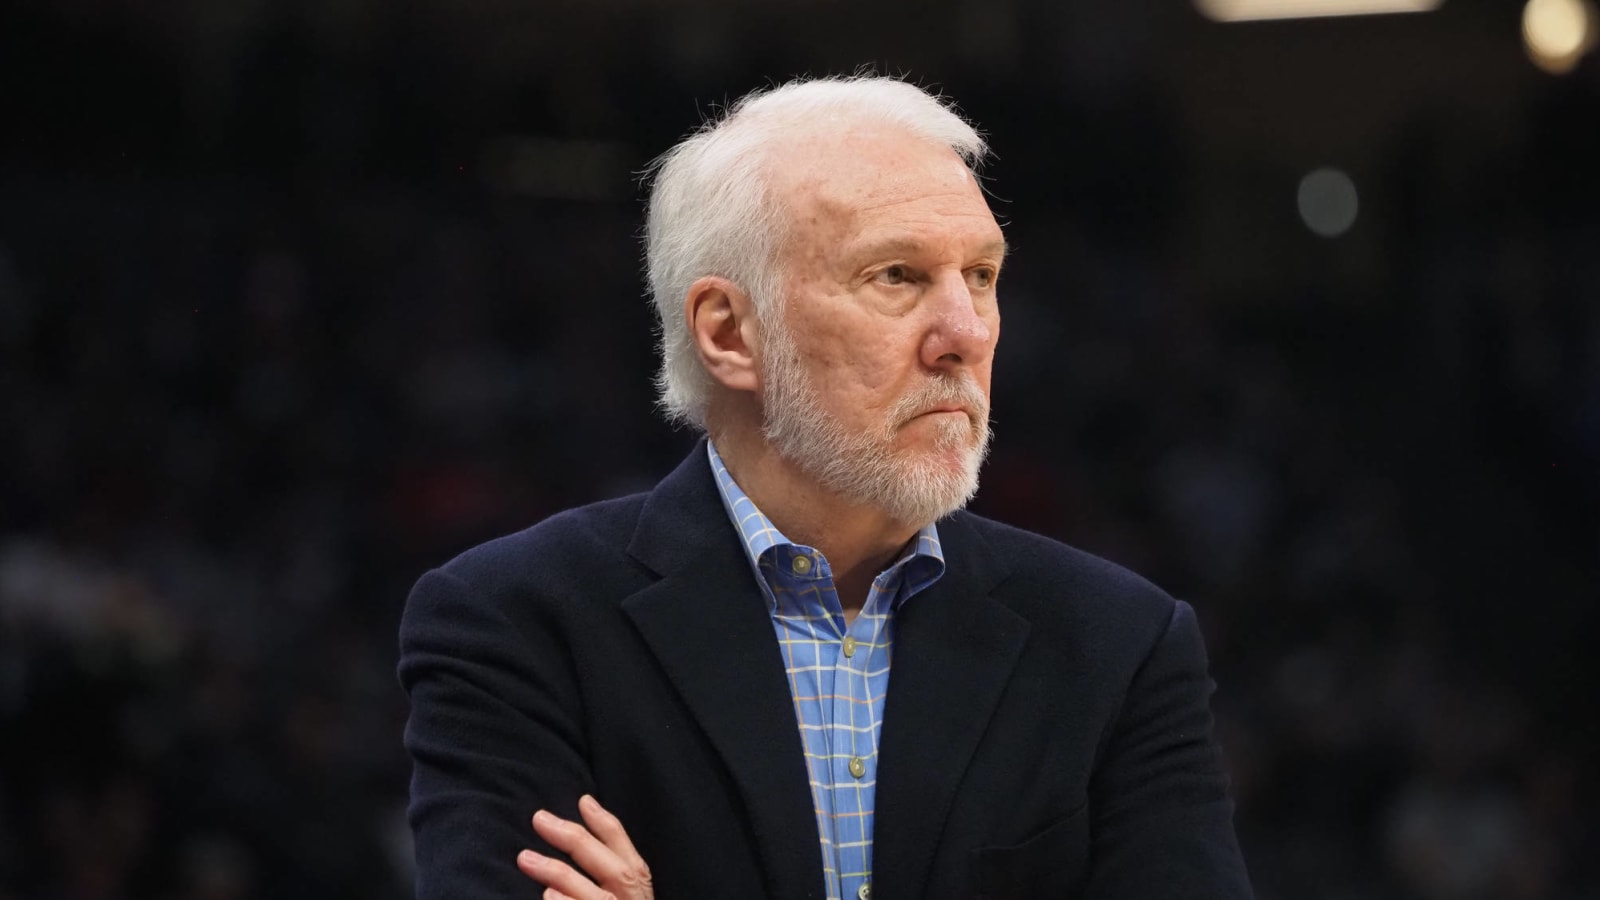 Team USA coach Popovich optimistic about Summer Olympics next year